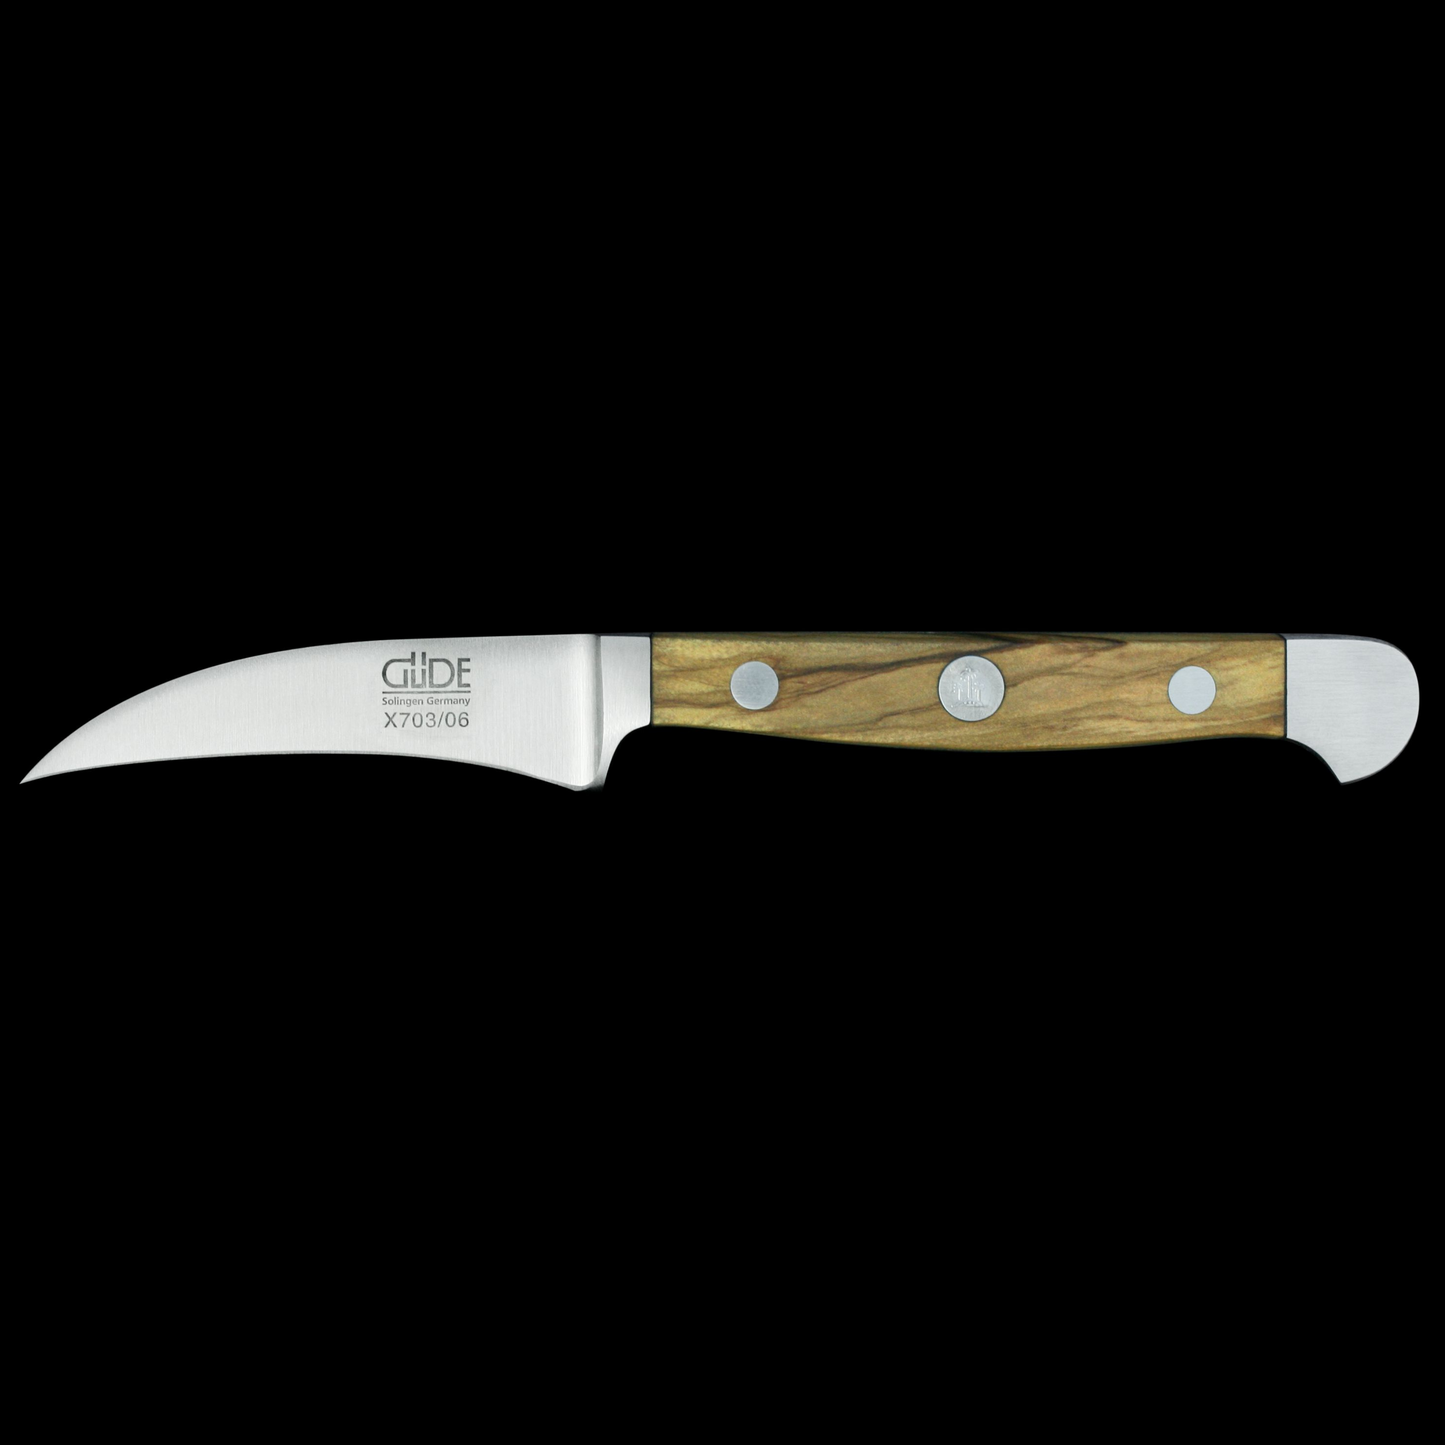 Gude Alpha Olive Series Forged Double Bolster Bird's Beak Knife 2", Olivewood Handle - GuedeUSA